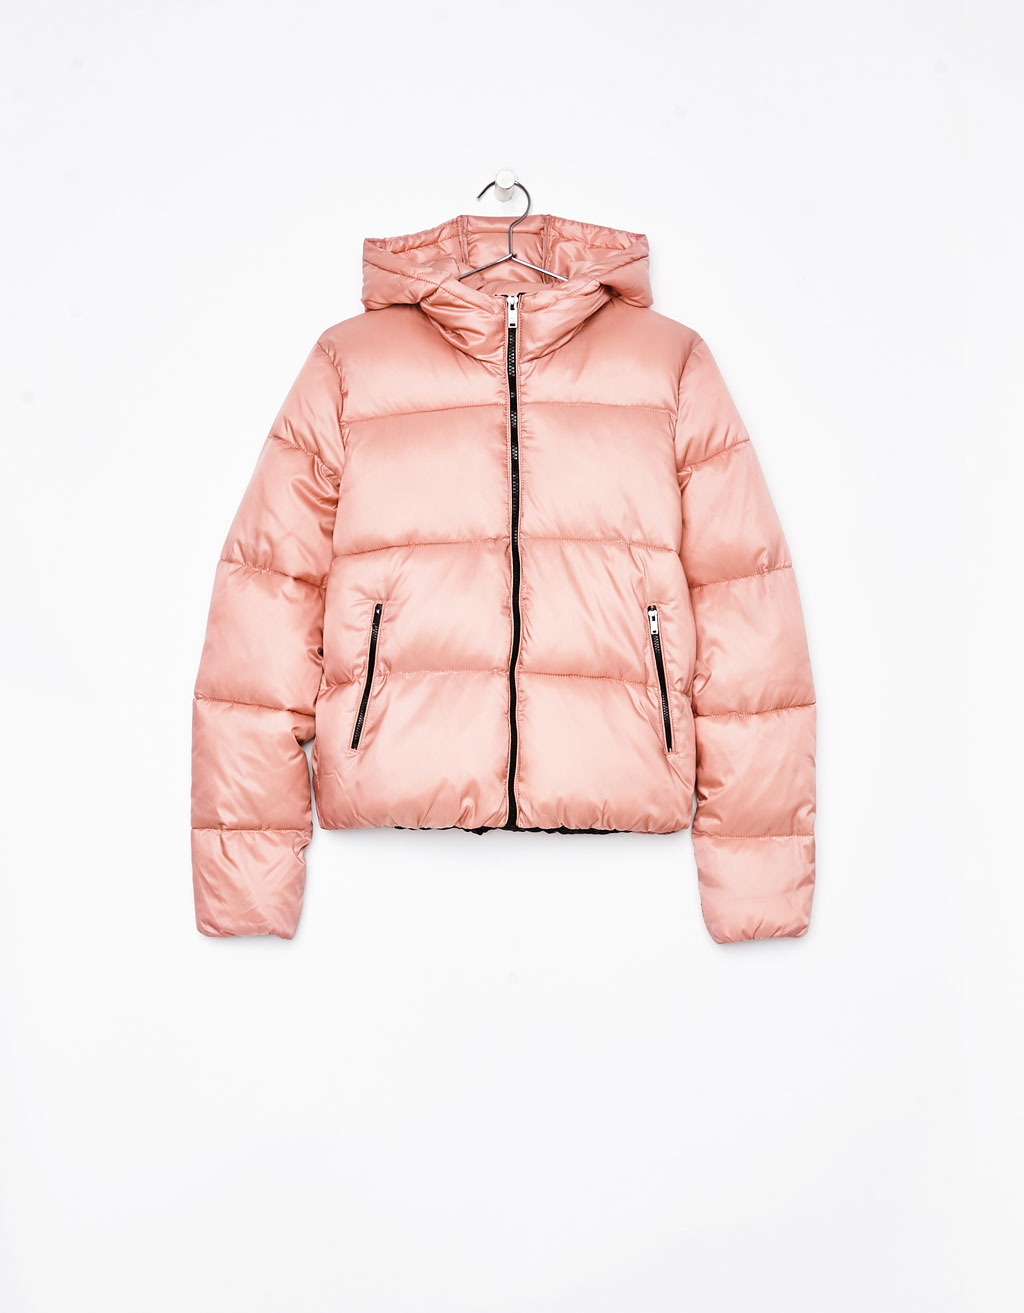 The €21 Bershka jacket that has made it onto Vogue's must-have list ...